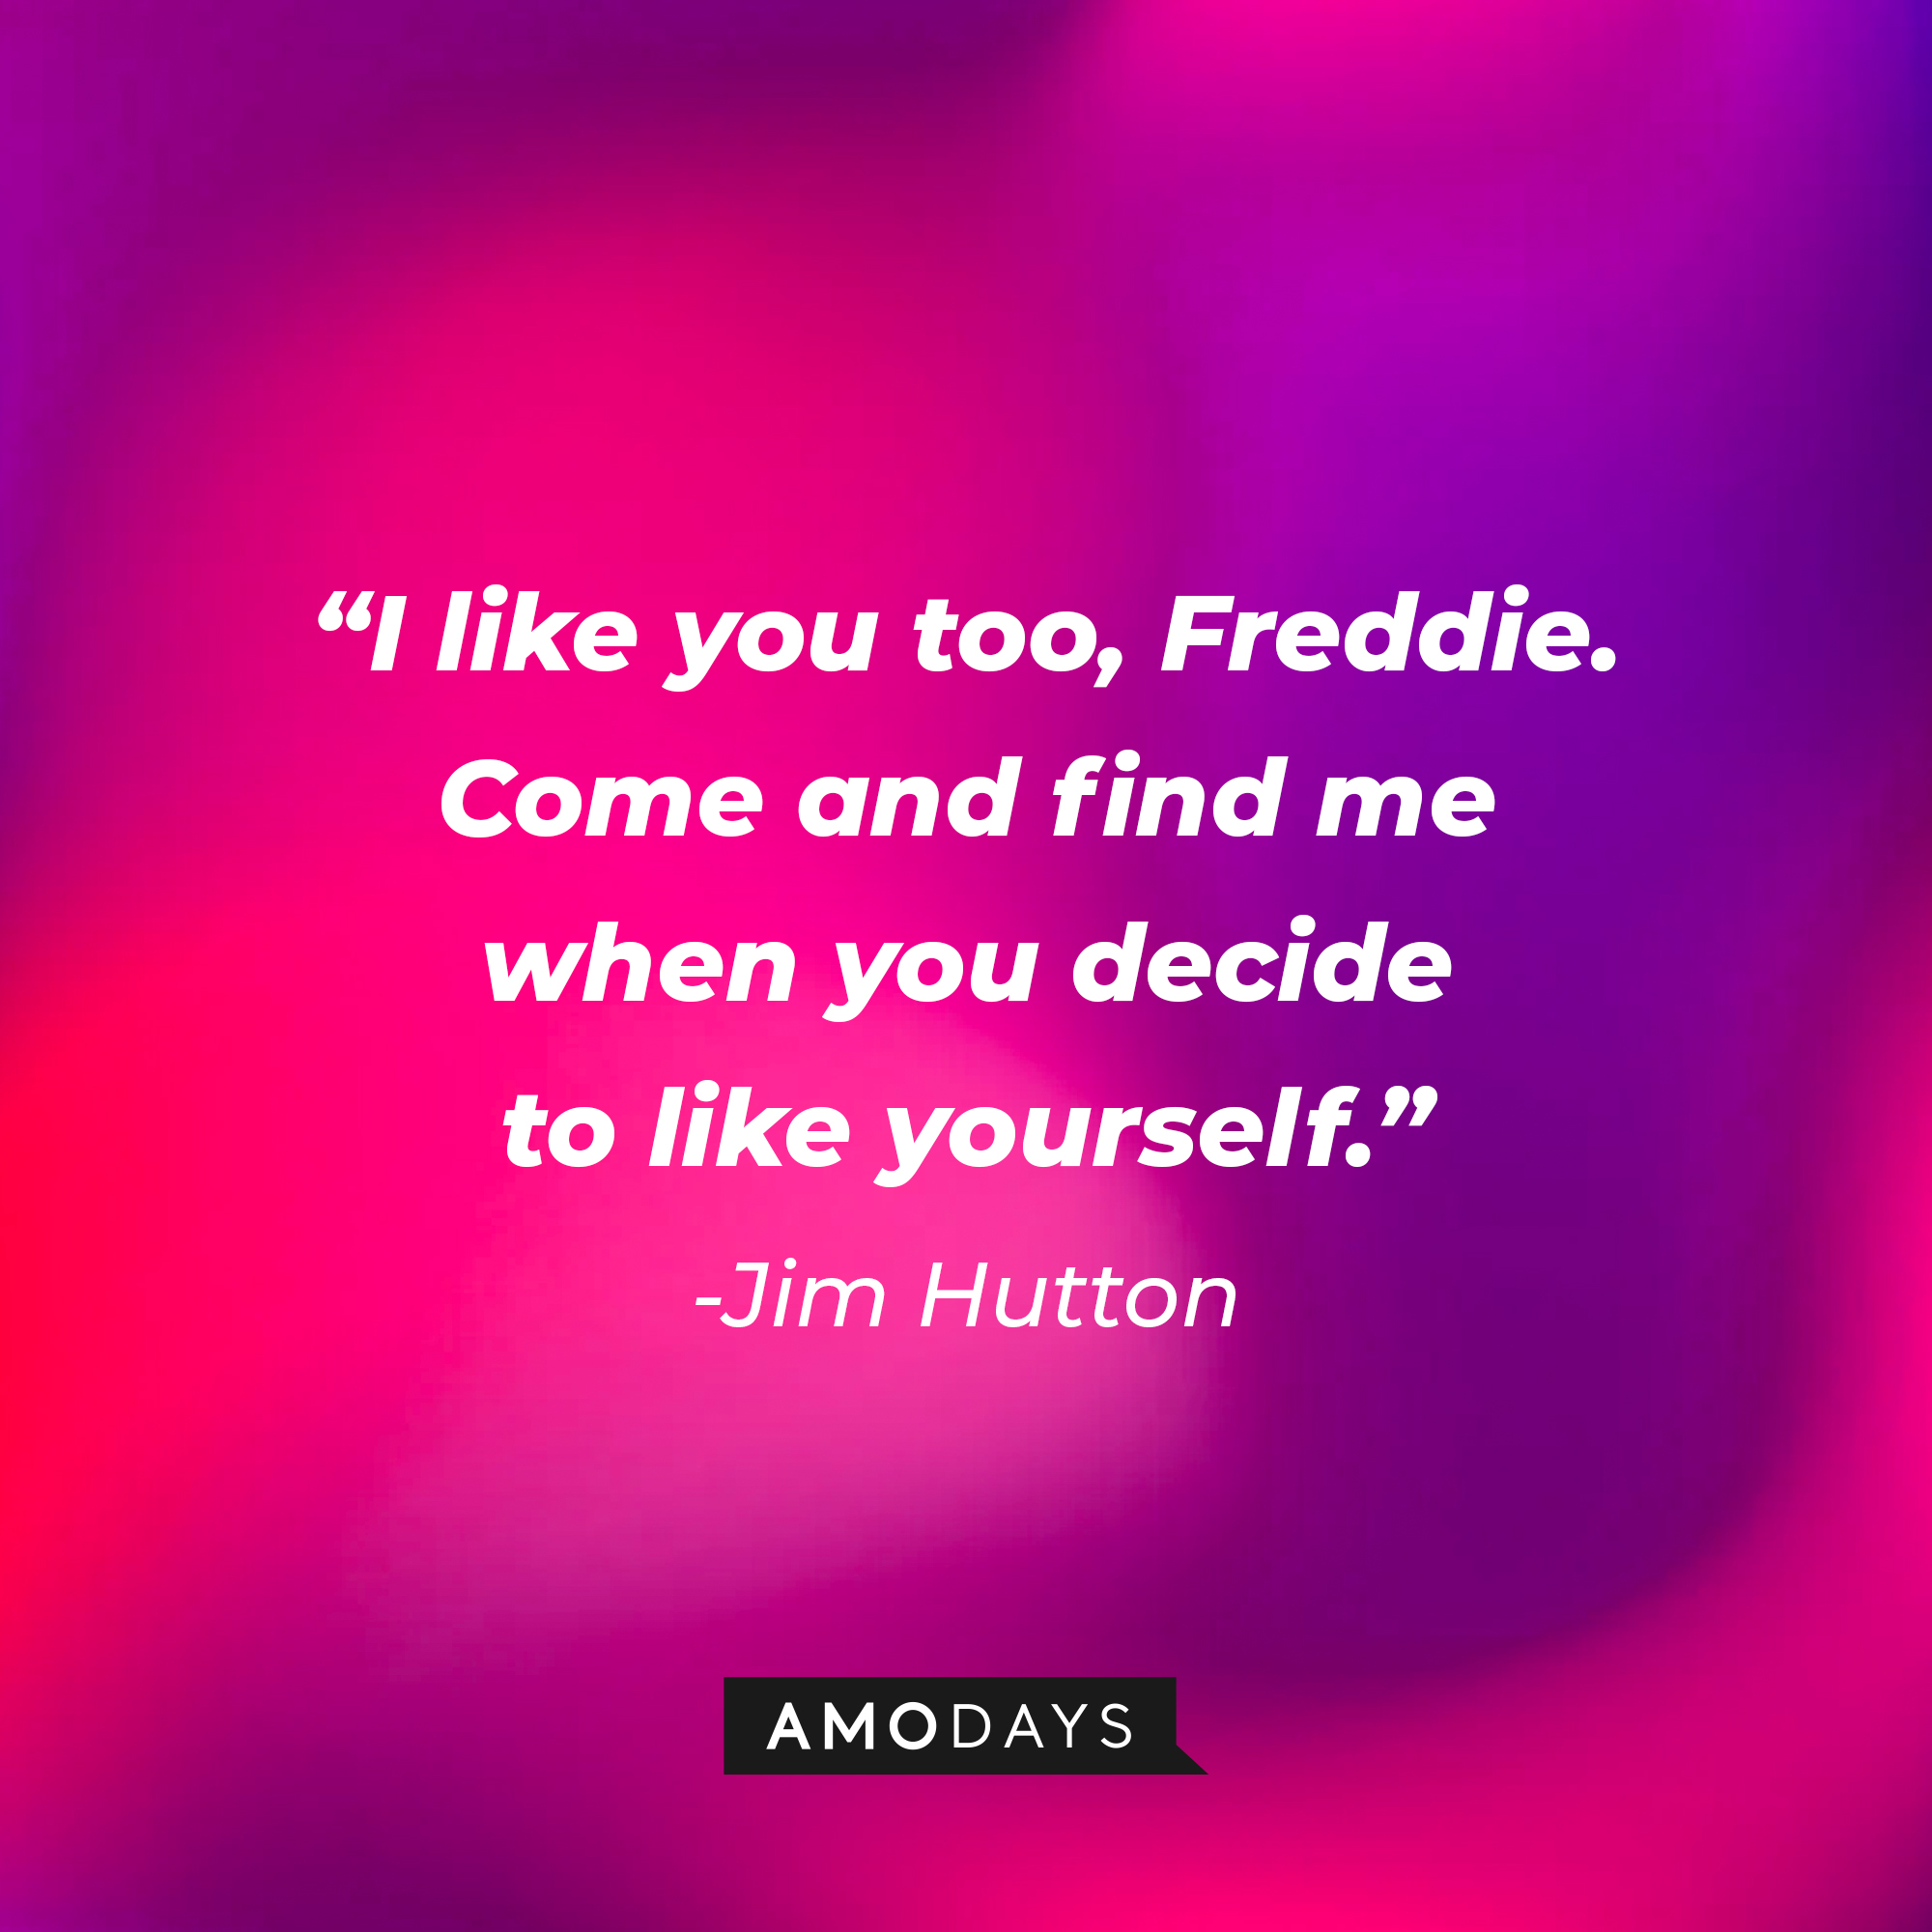 Jim Hutton with his quote: "I like you too, Freddie. Come and find me when you decide to like yourself." | Source: Amodays